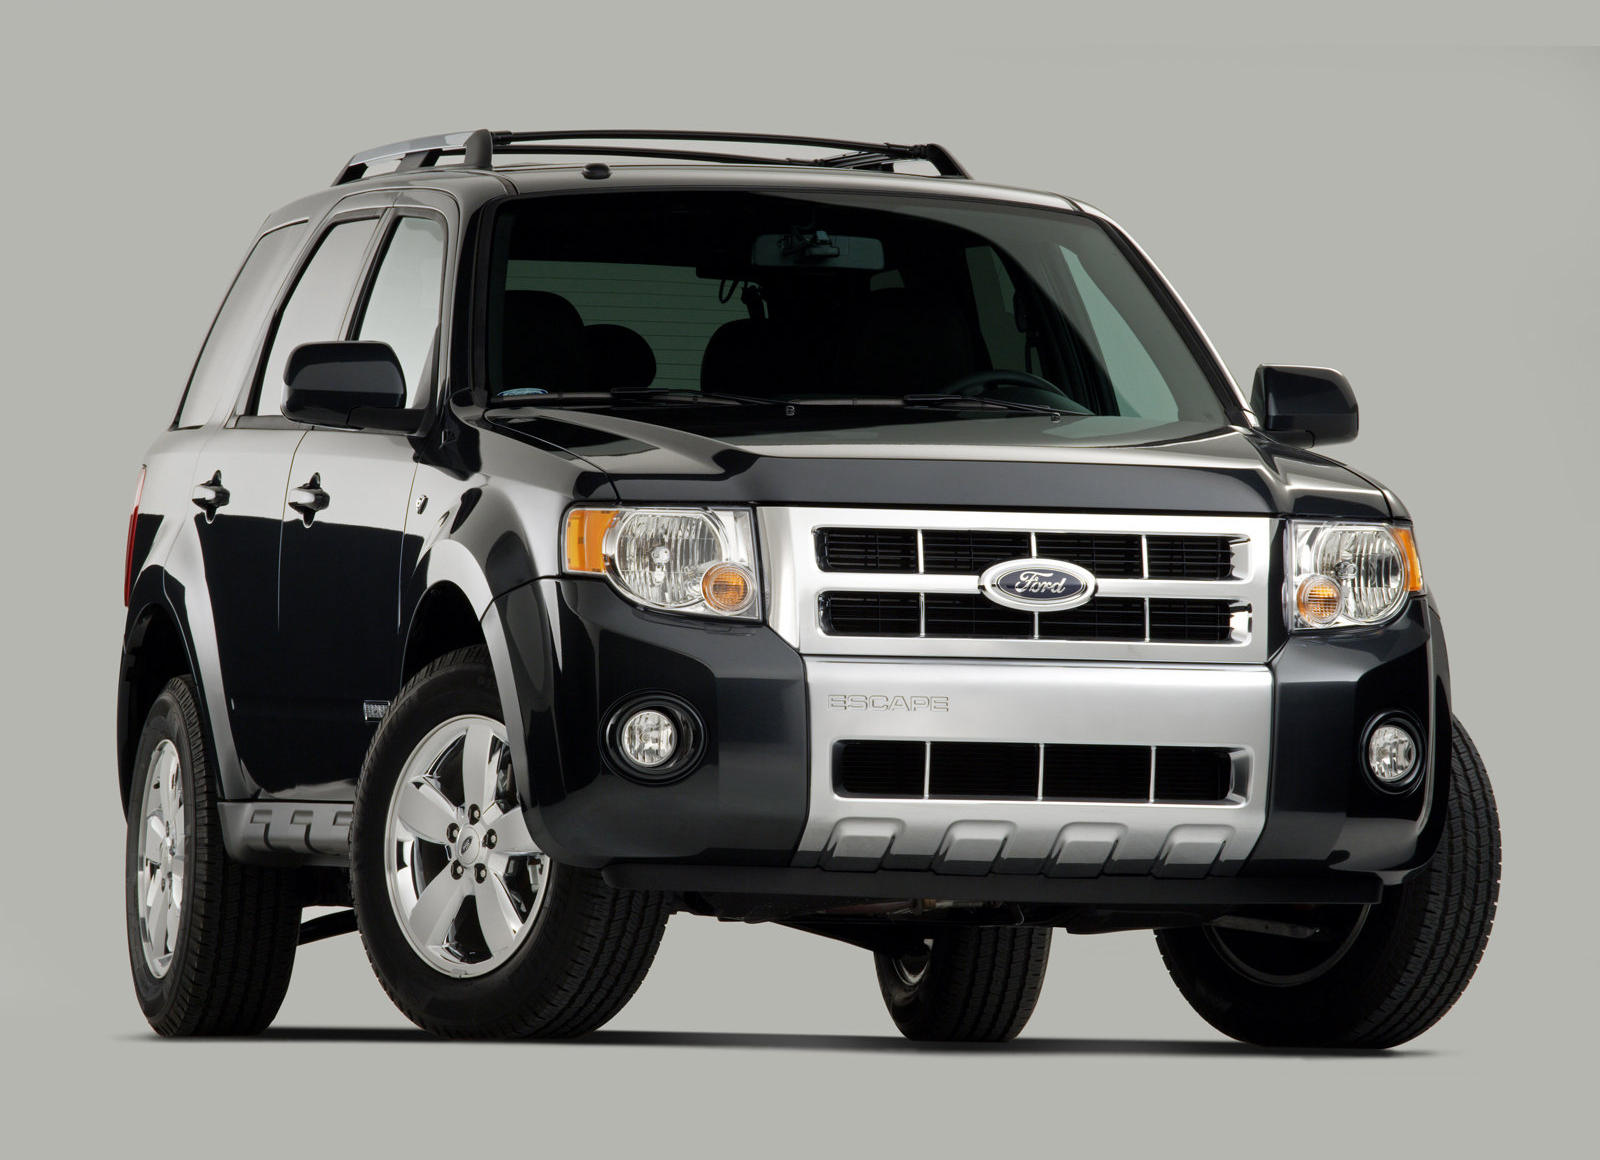 2008 Ford Escape Front Angle View